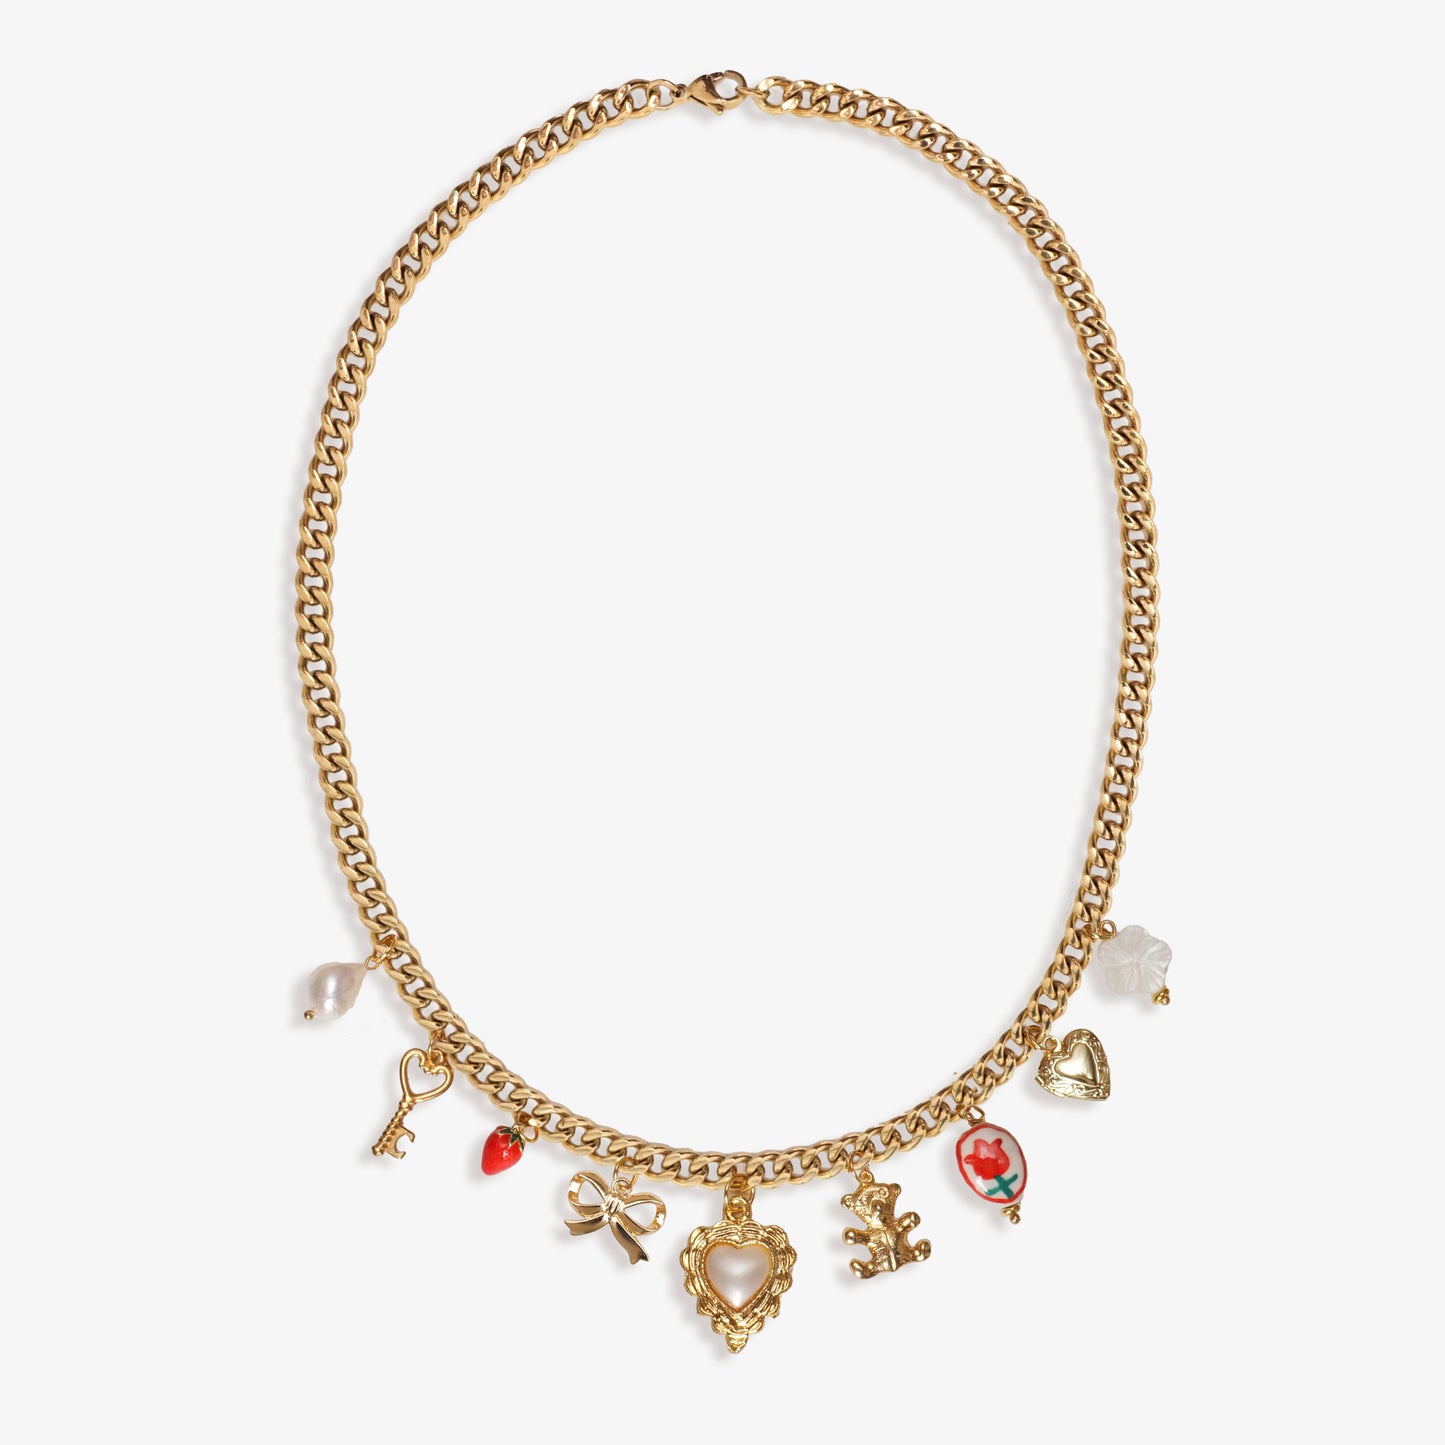 Bisous Charm Necklace